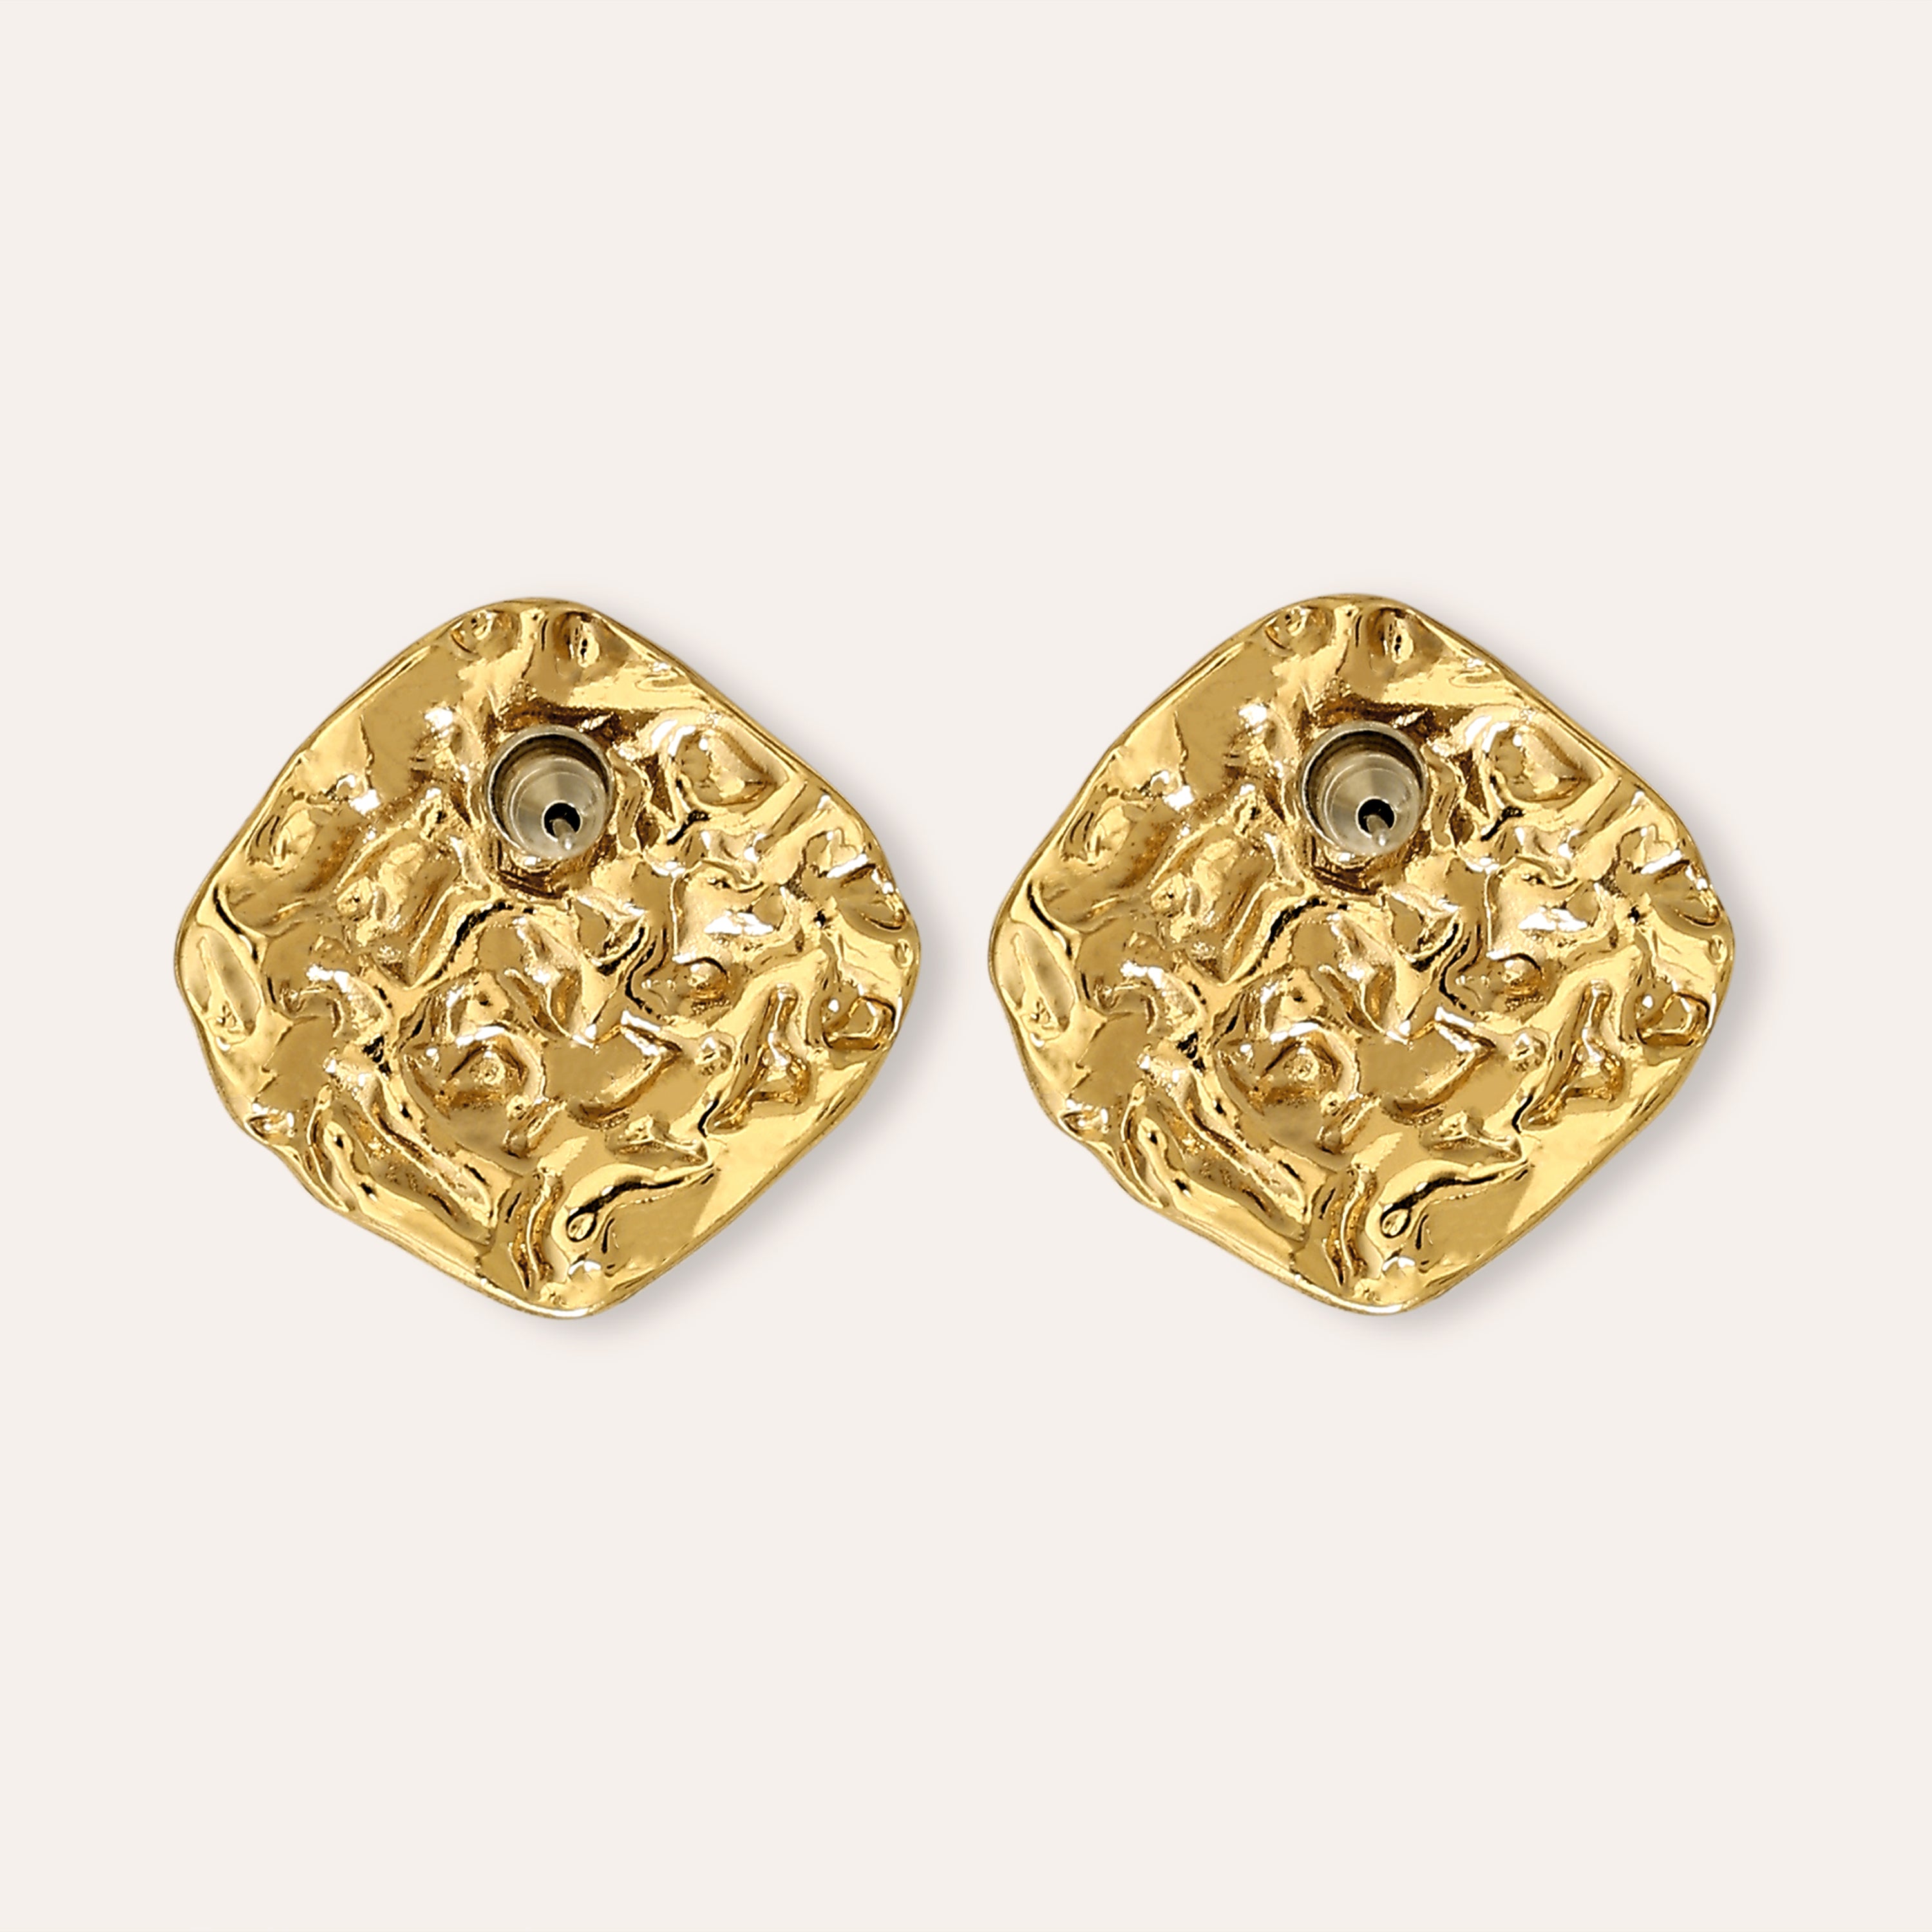 TFC Italian Luxury Gold Plated Stud Earrings-Discover daily wear gold earrings including stud earrings, hoop earrings, and pearl earrings, perfect as earrings for women and earrings for girls.Find the cheapest fashion jewellery which is anti-tarnis​h only at The Fun company